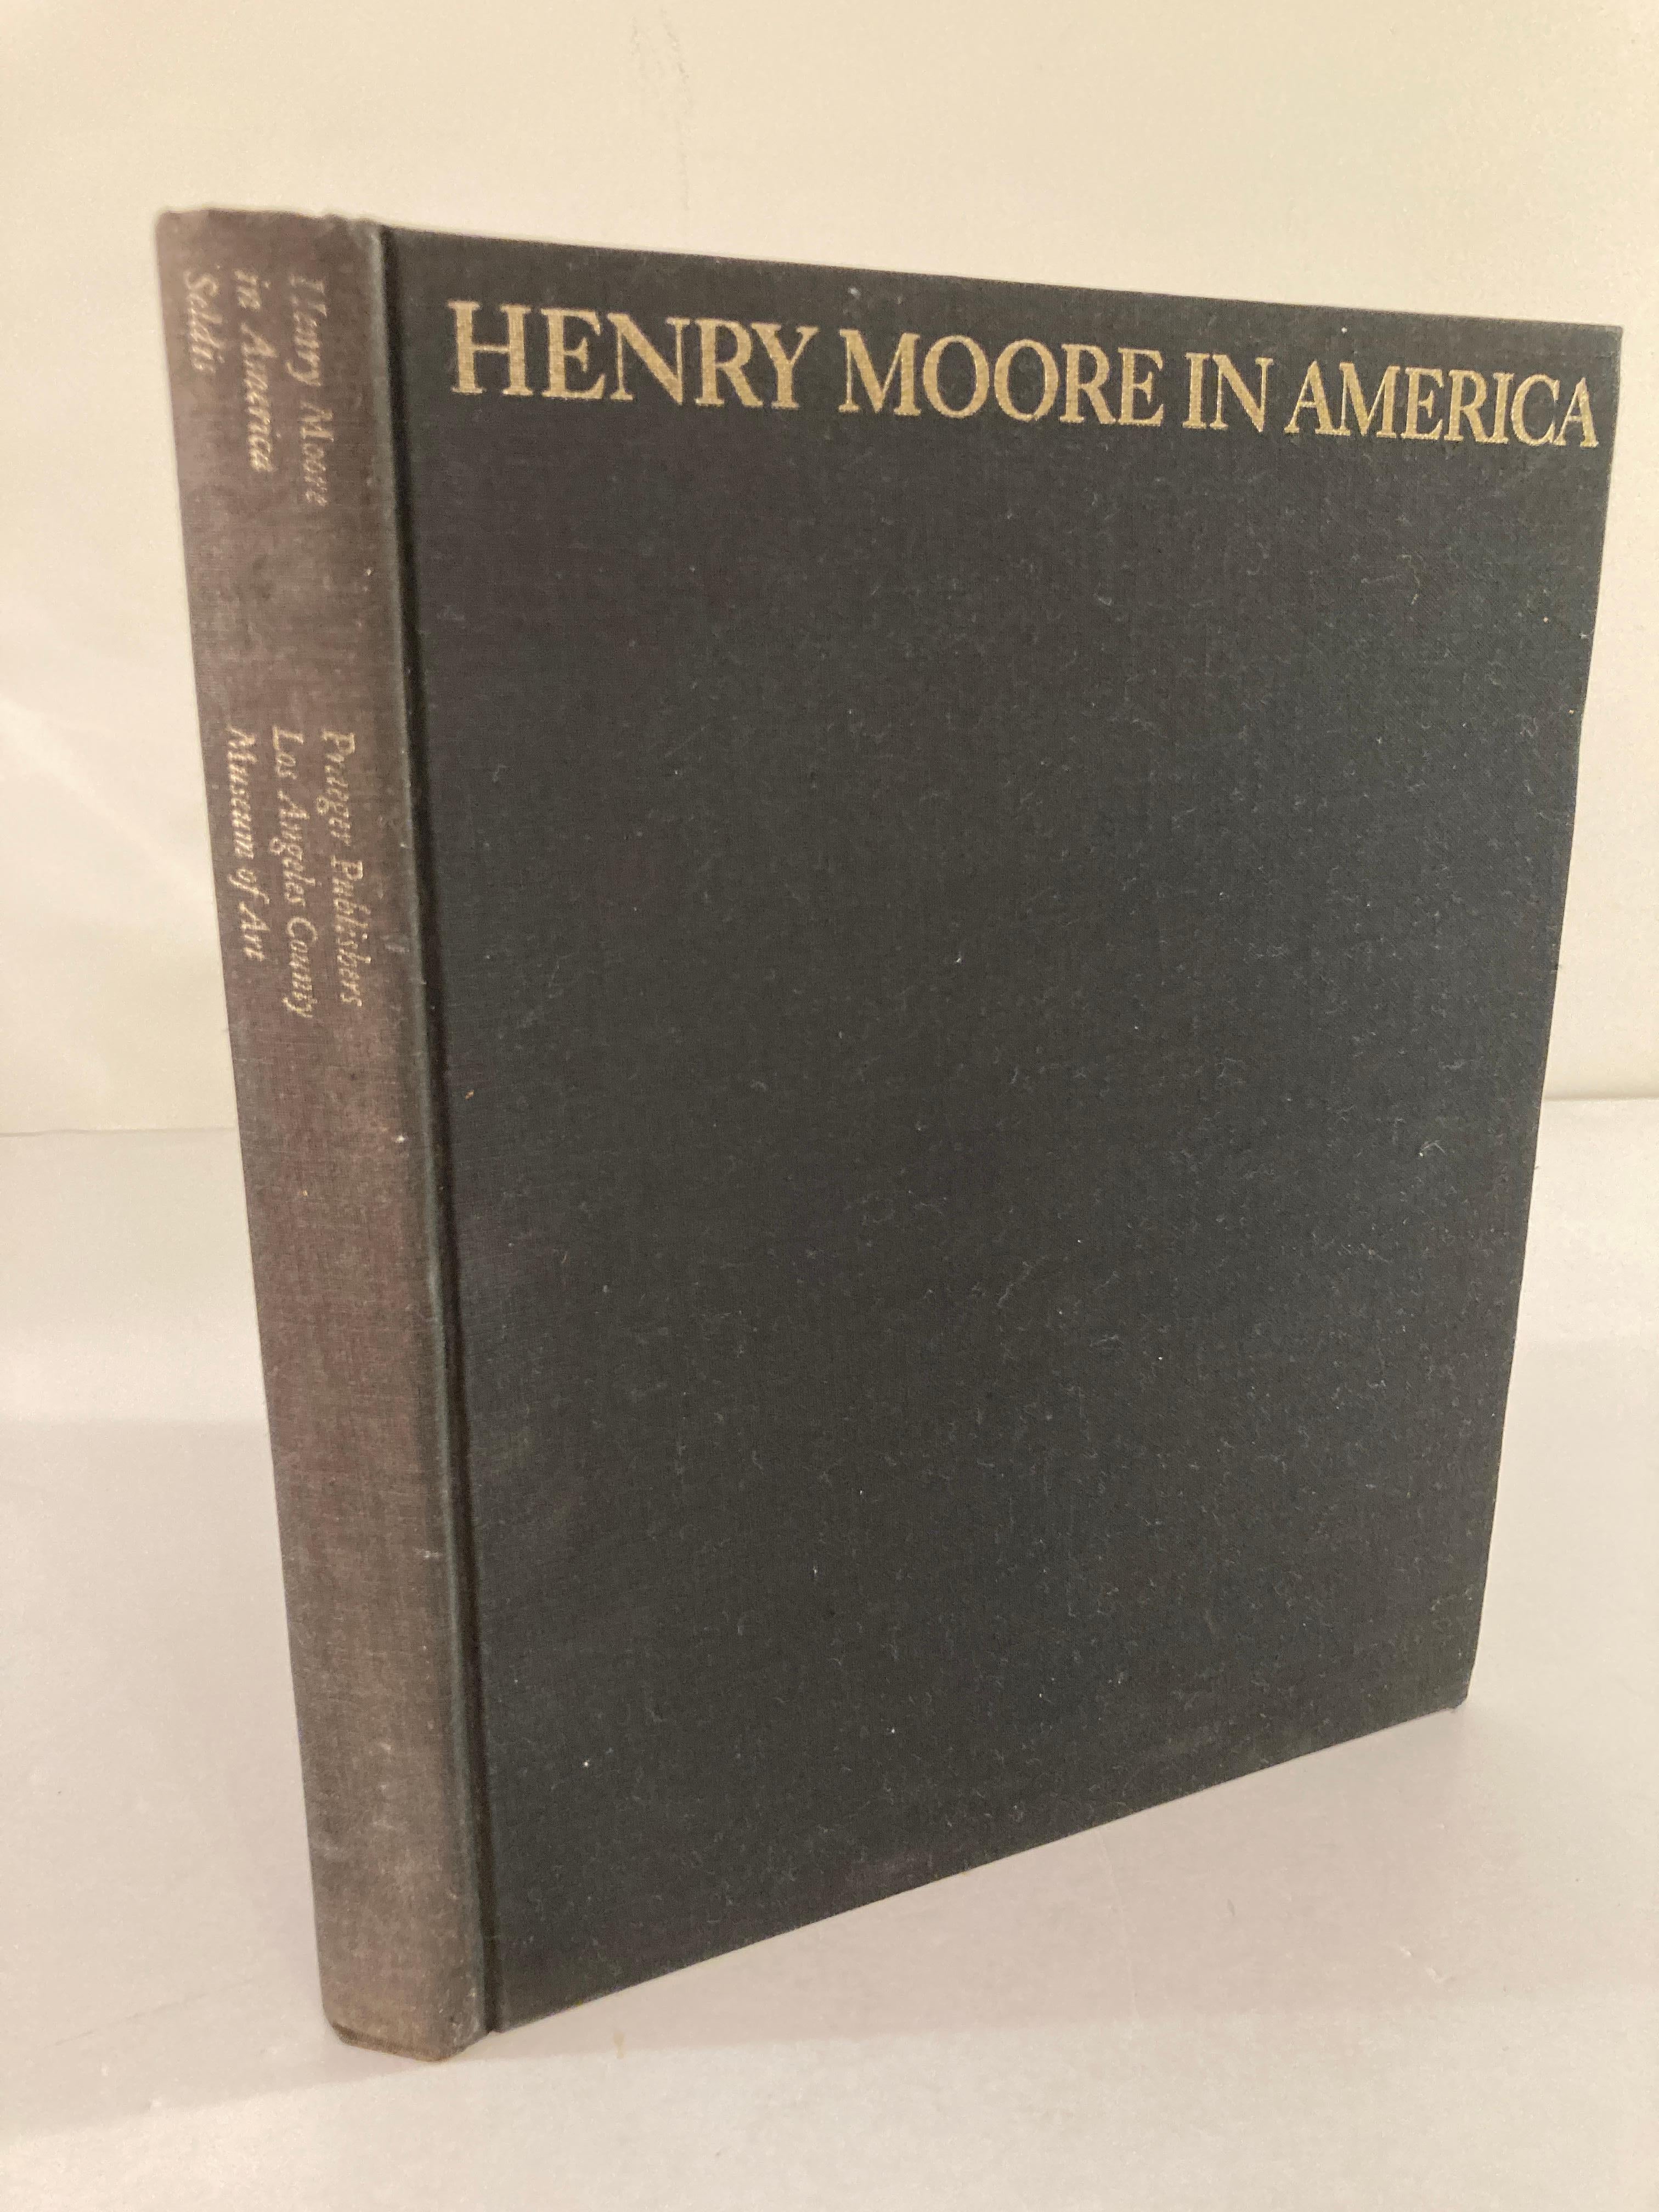 Post-Modern Henri Moore in America Collectible Art Book, 1973